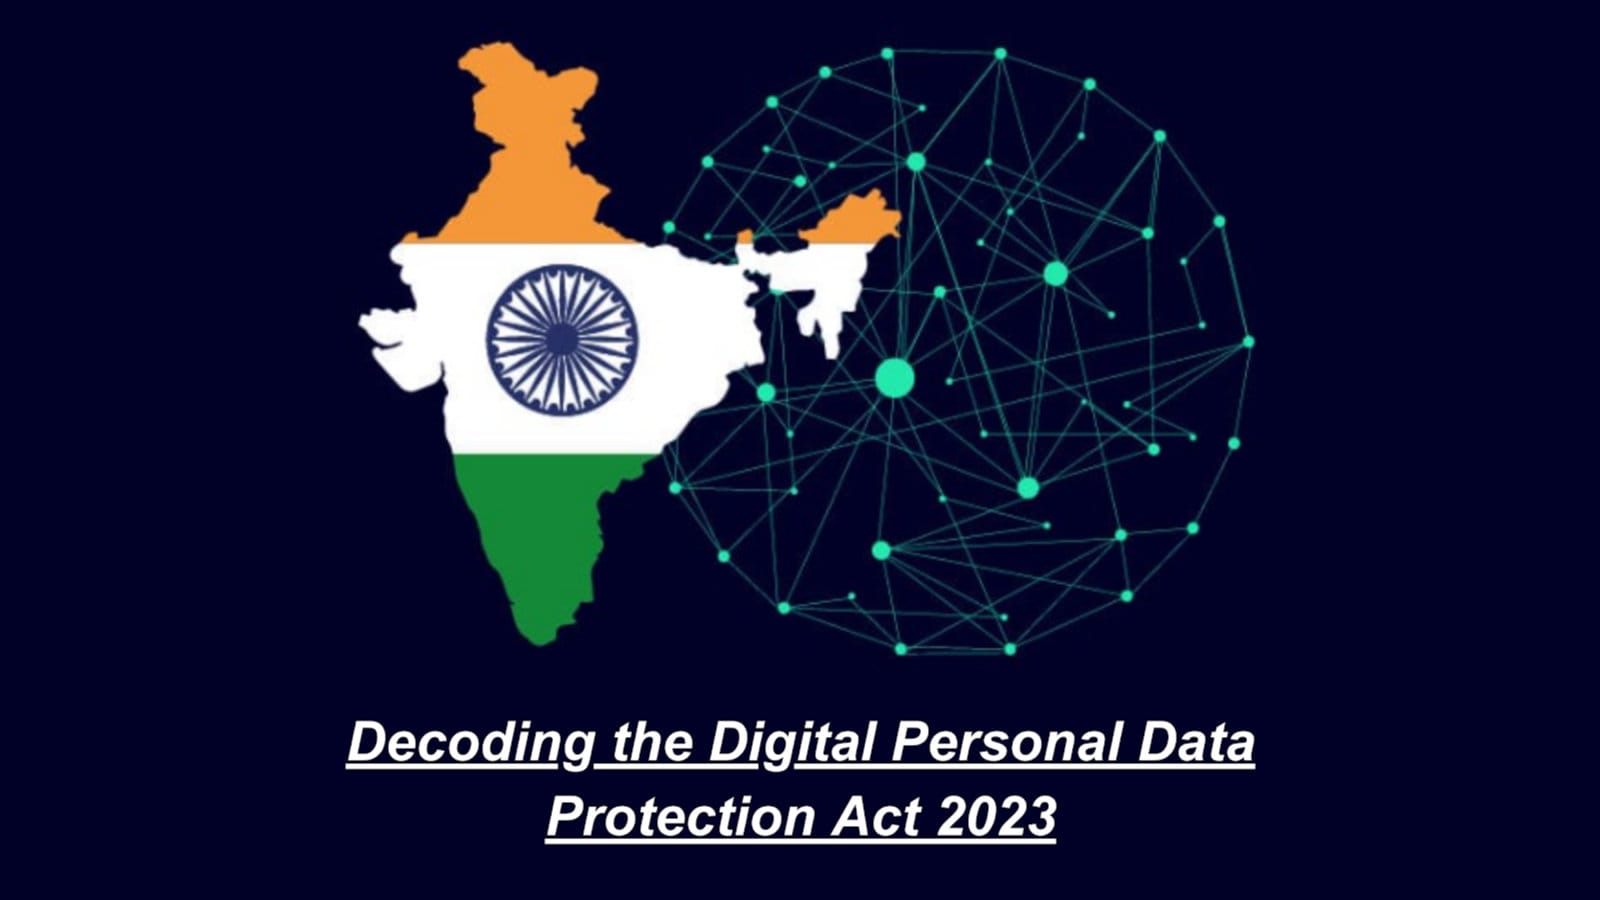 Decoding the Digital Personal Data Protection Act 2023